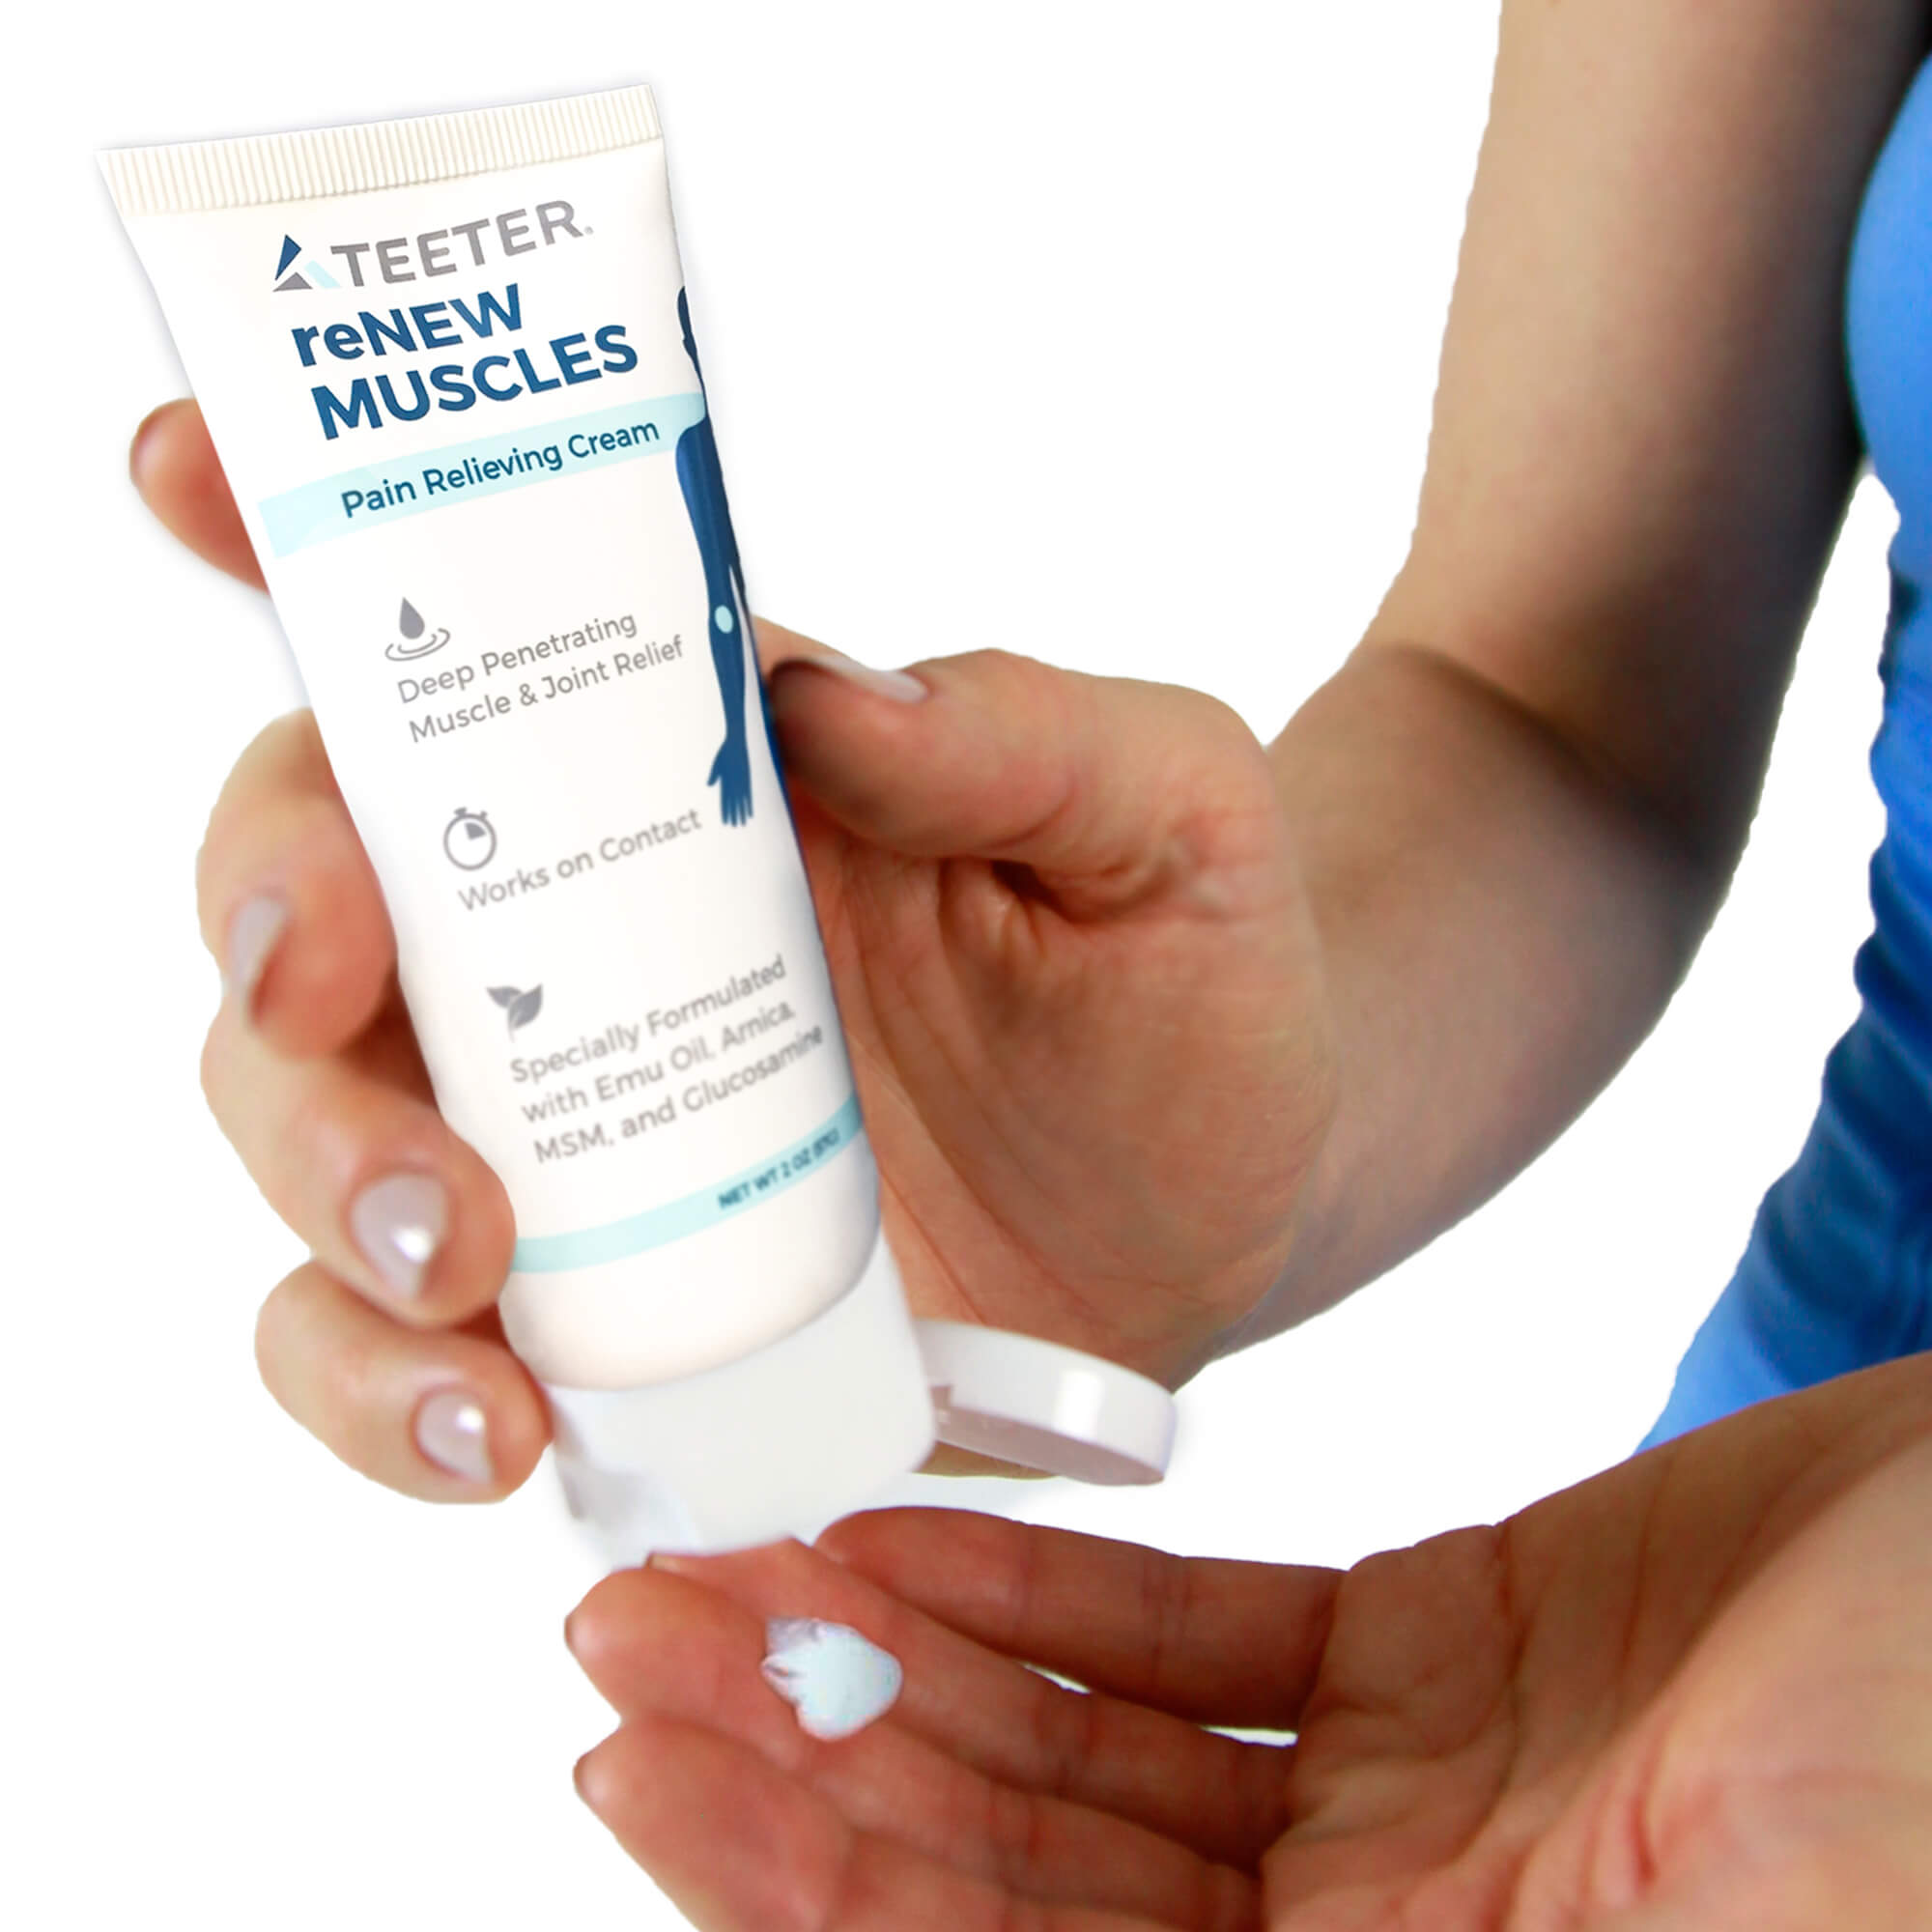 Pain relief cream for muscle, joint, and inflammation recovery